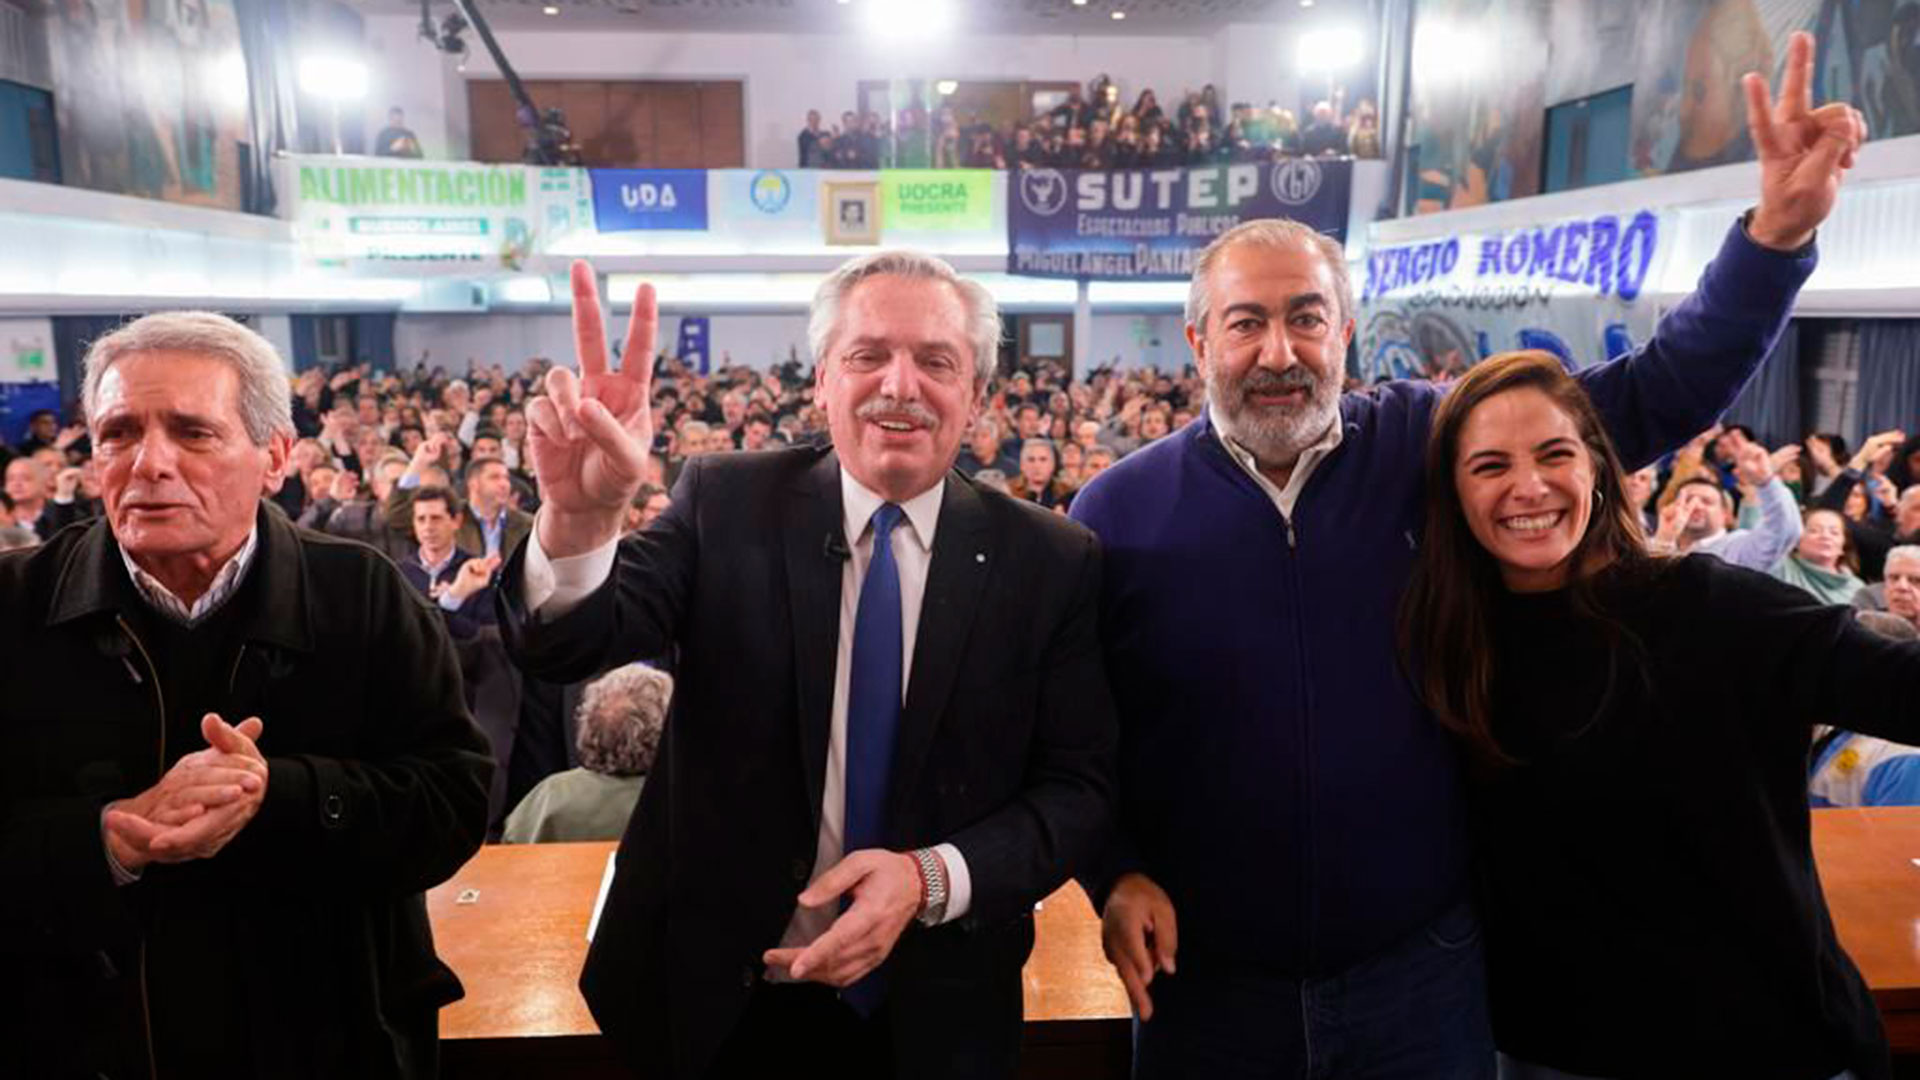 Carlos Acuña, Héctor Daer, Alberto Fernández and Daniela Merino, from the Juventud Sindical, at the end of the event at the CGT